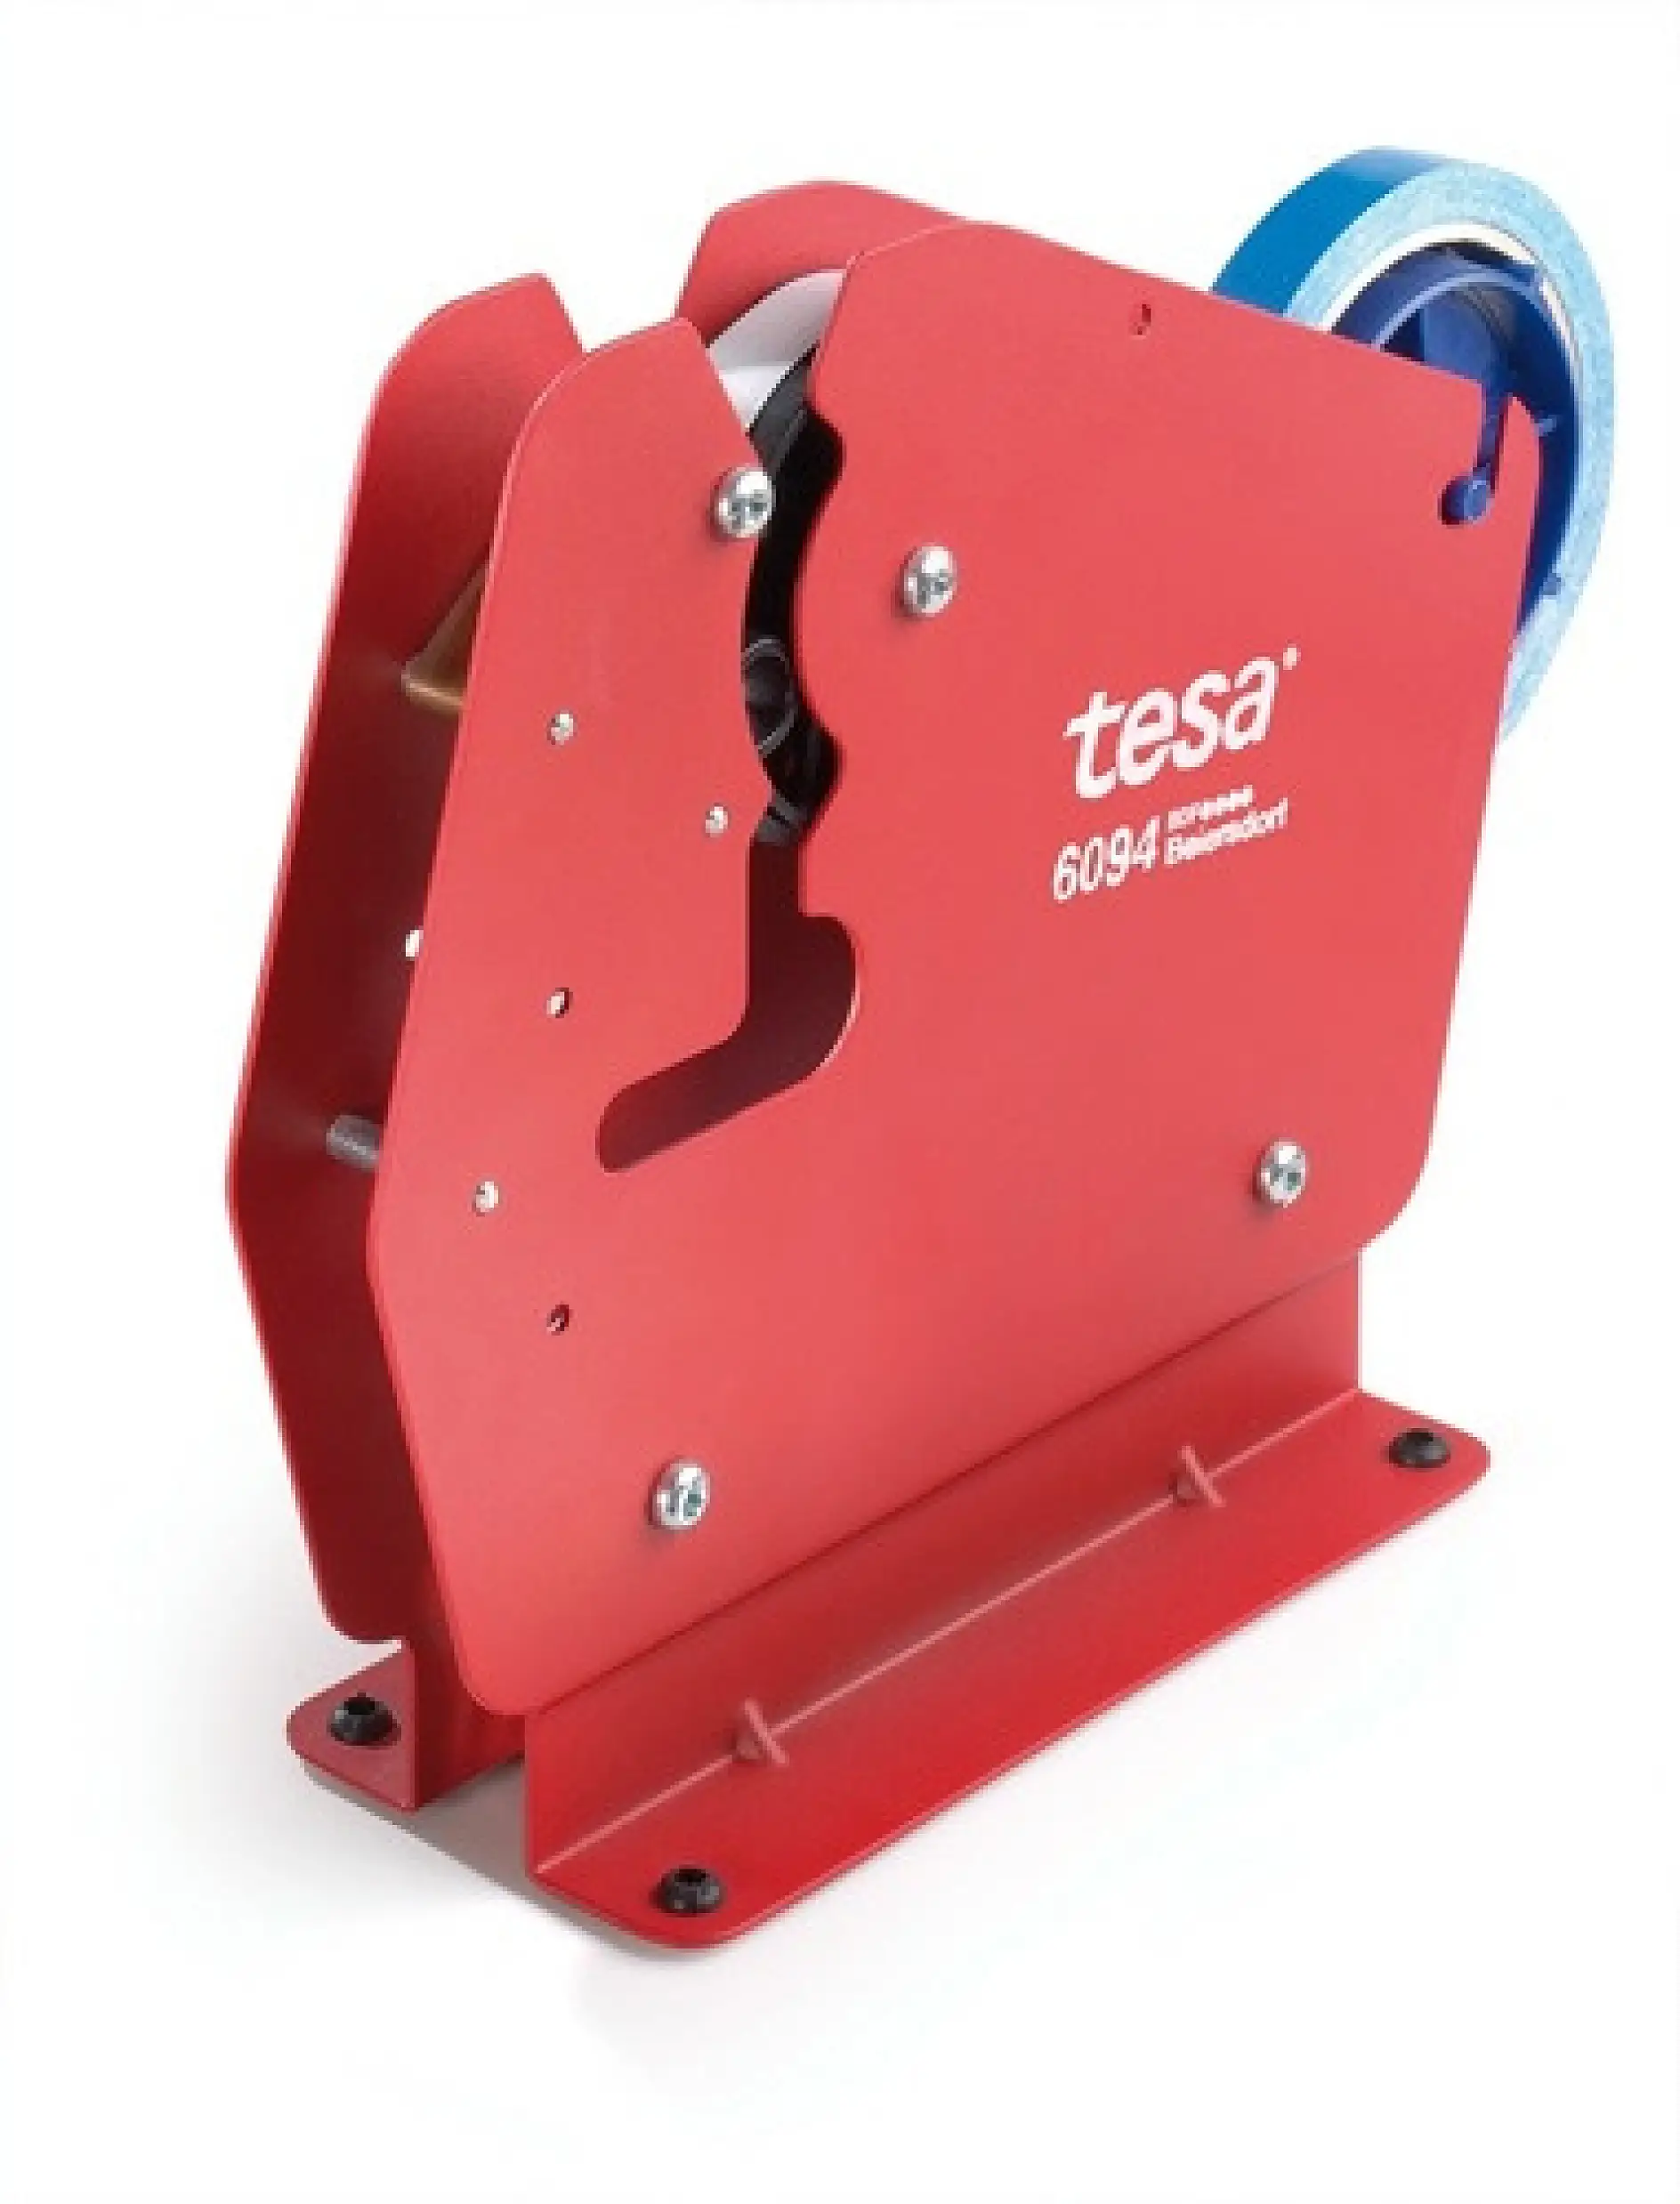 The tesa bag sealing dispenser 4204 was developed to effectively seal any plastic or paper bag.